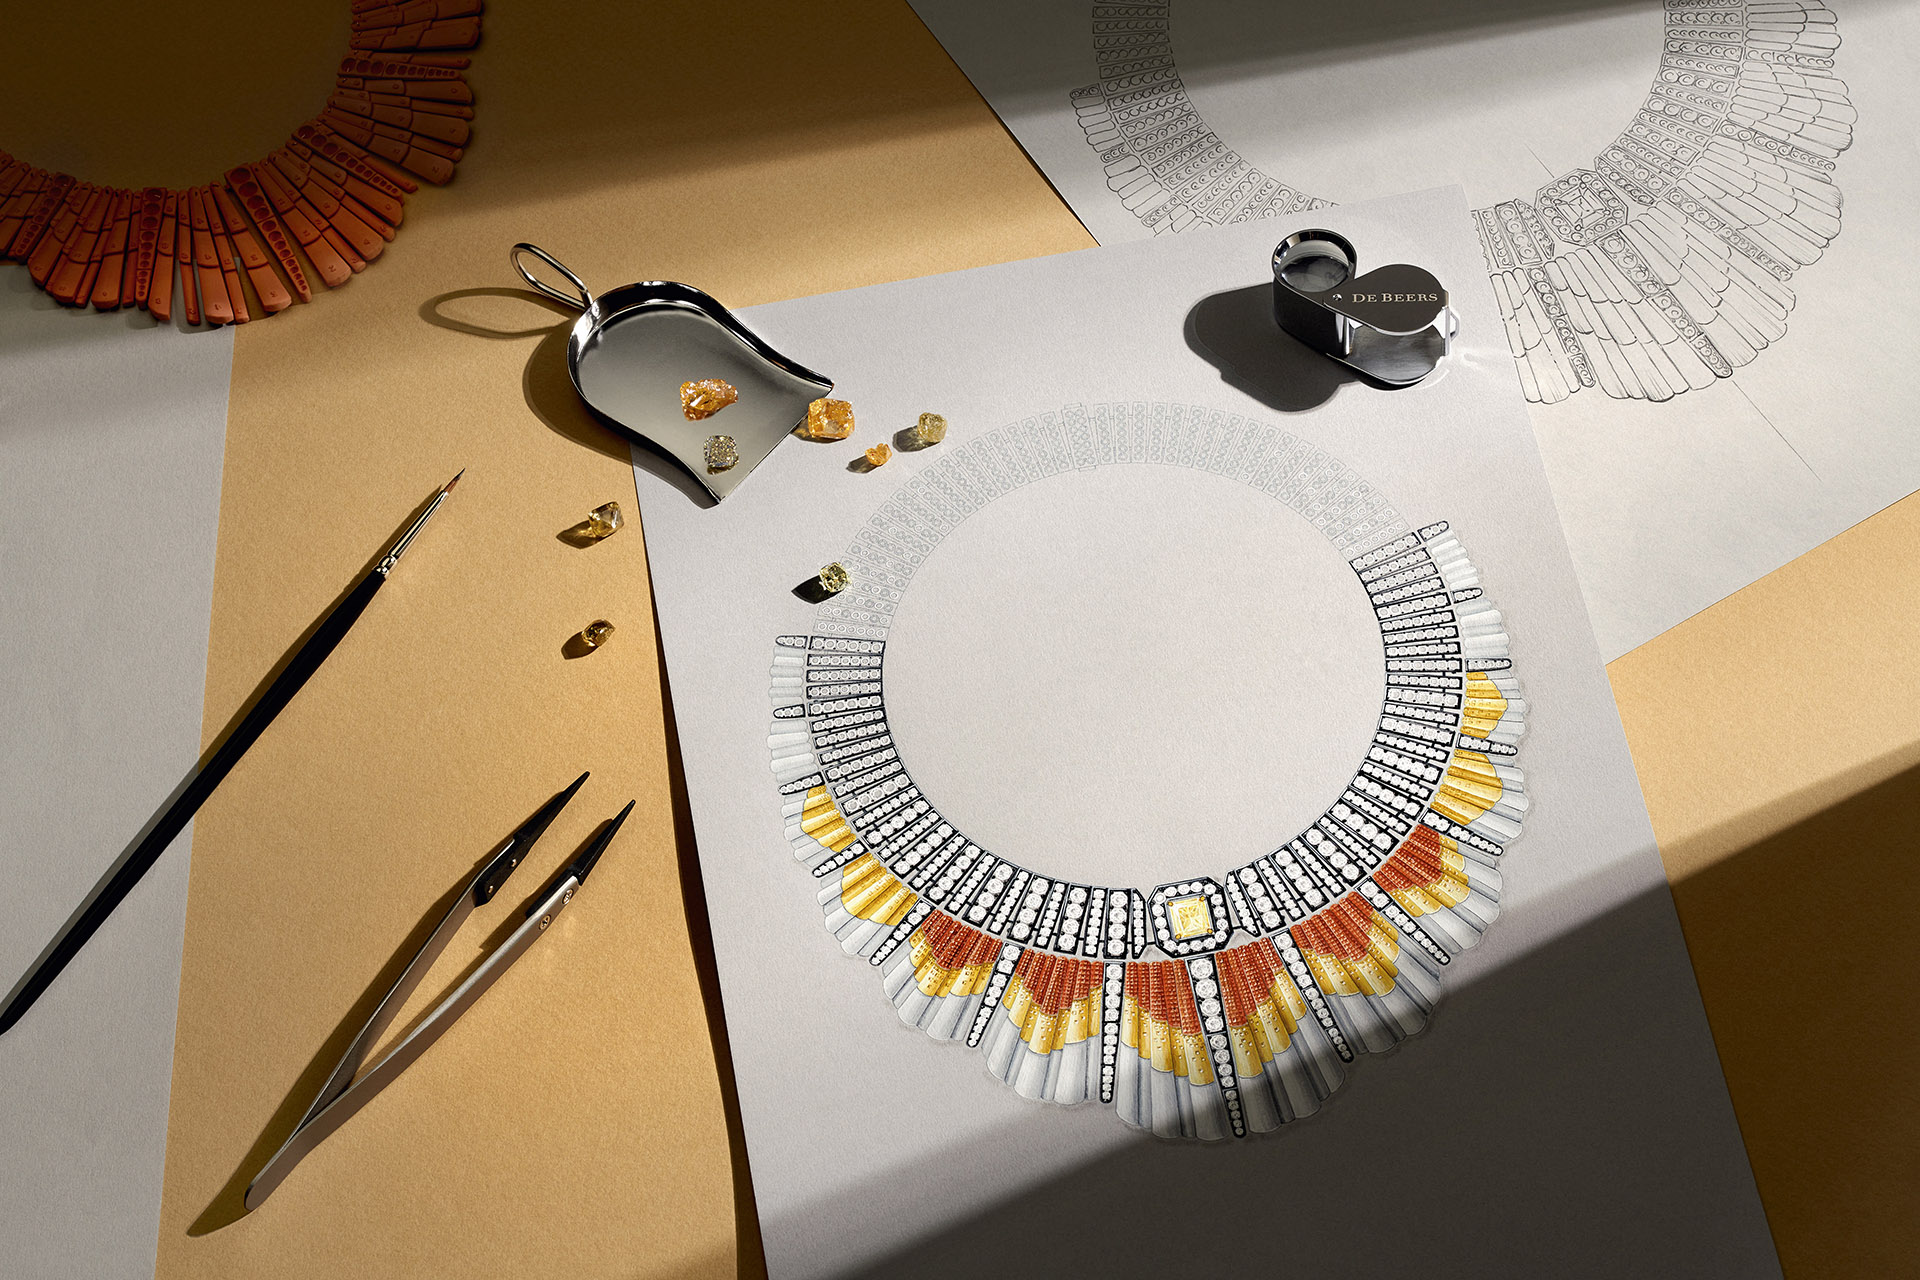 Paris Collections: The high jewelry market is on a high